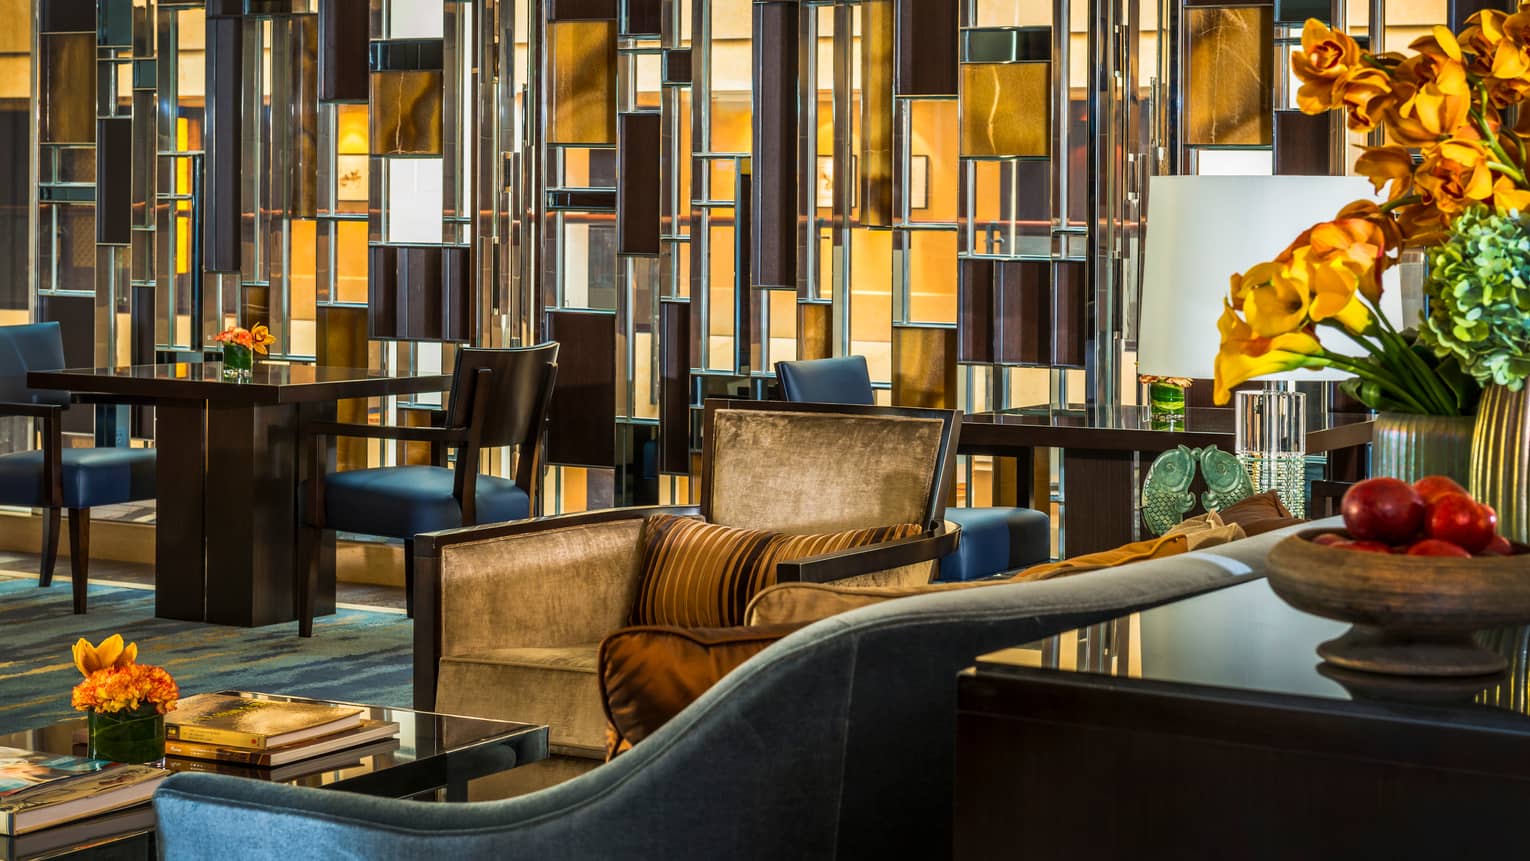 Close-up of Executive Club Lounge armchairs, decorative glass accent wall with wood panels